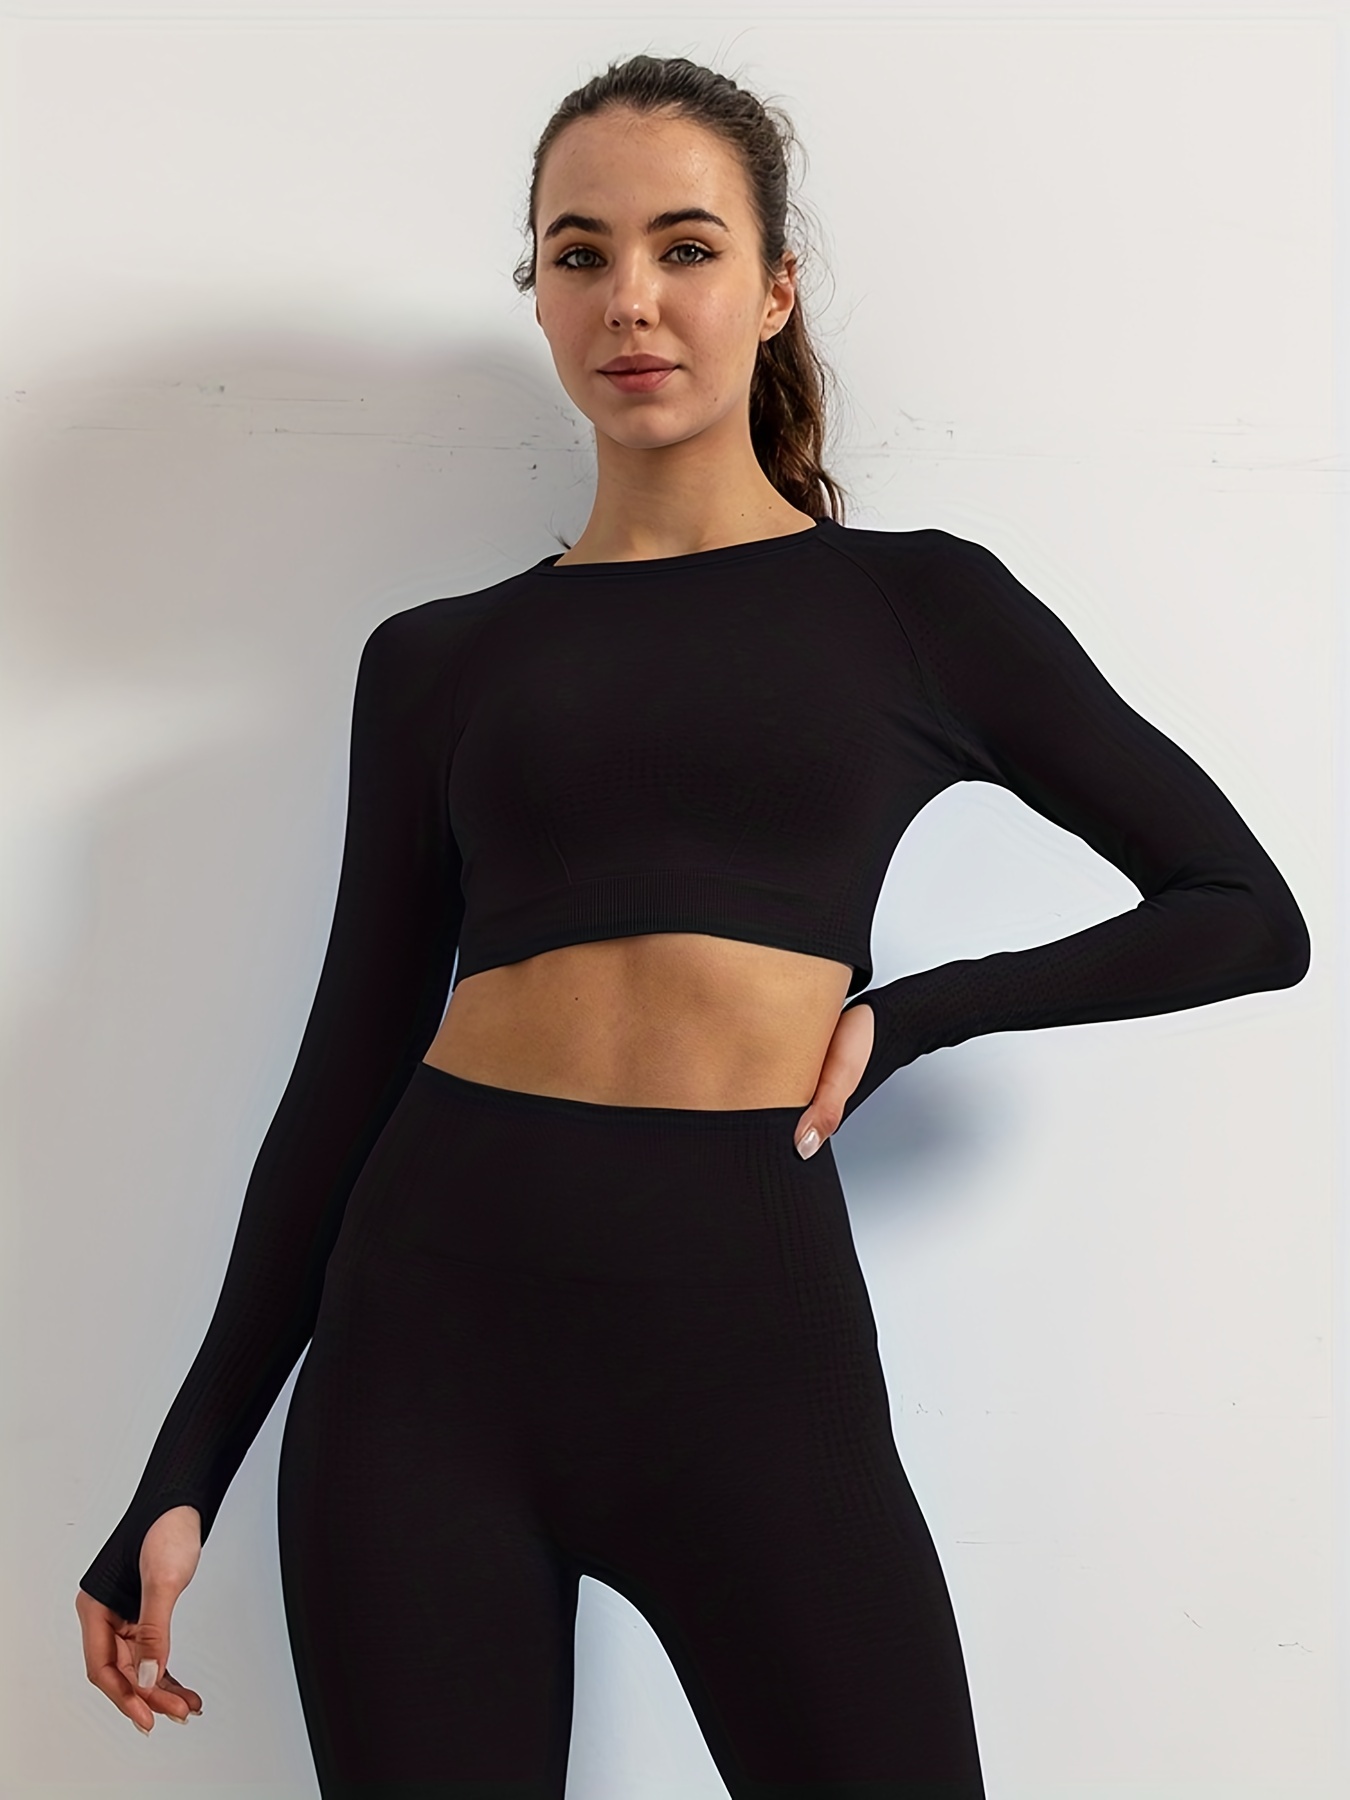 Seamless Long Sleeve Stretch Crop Top For Women Perfect For Yoga, Running,  And Fitness Workouts With Thumb Holes And Half Zip Stylish And Comfortable  Long Sleeve Sports Top For Ladies From Fashionchinaclothes